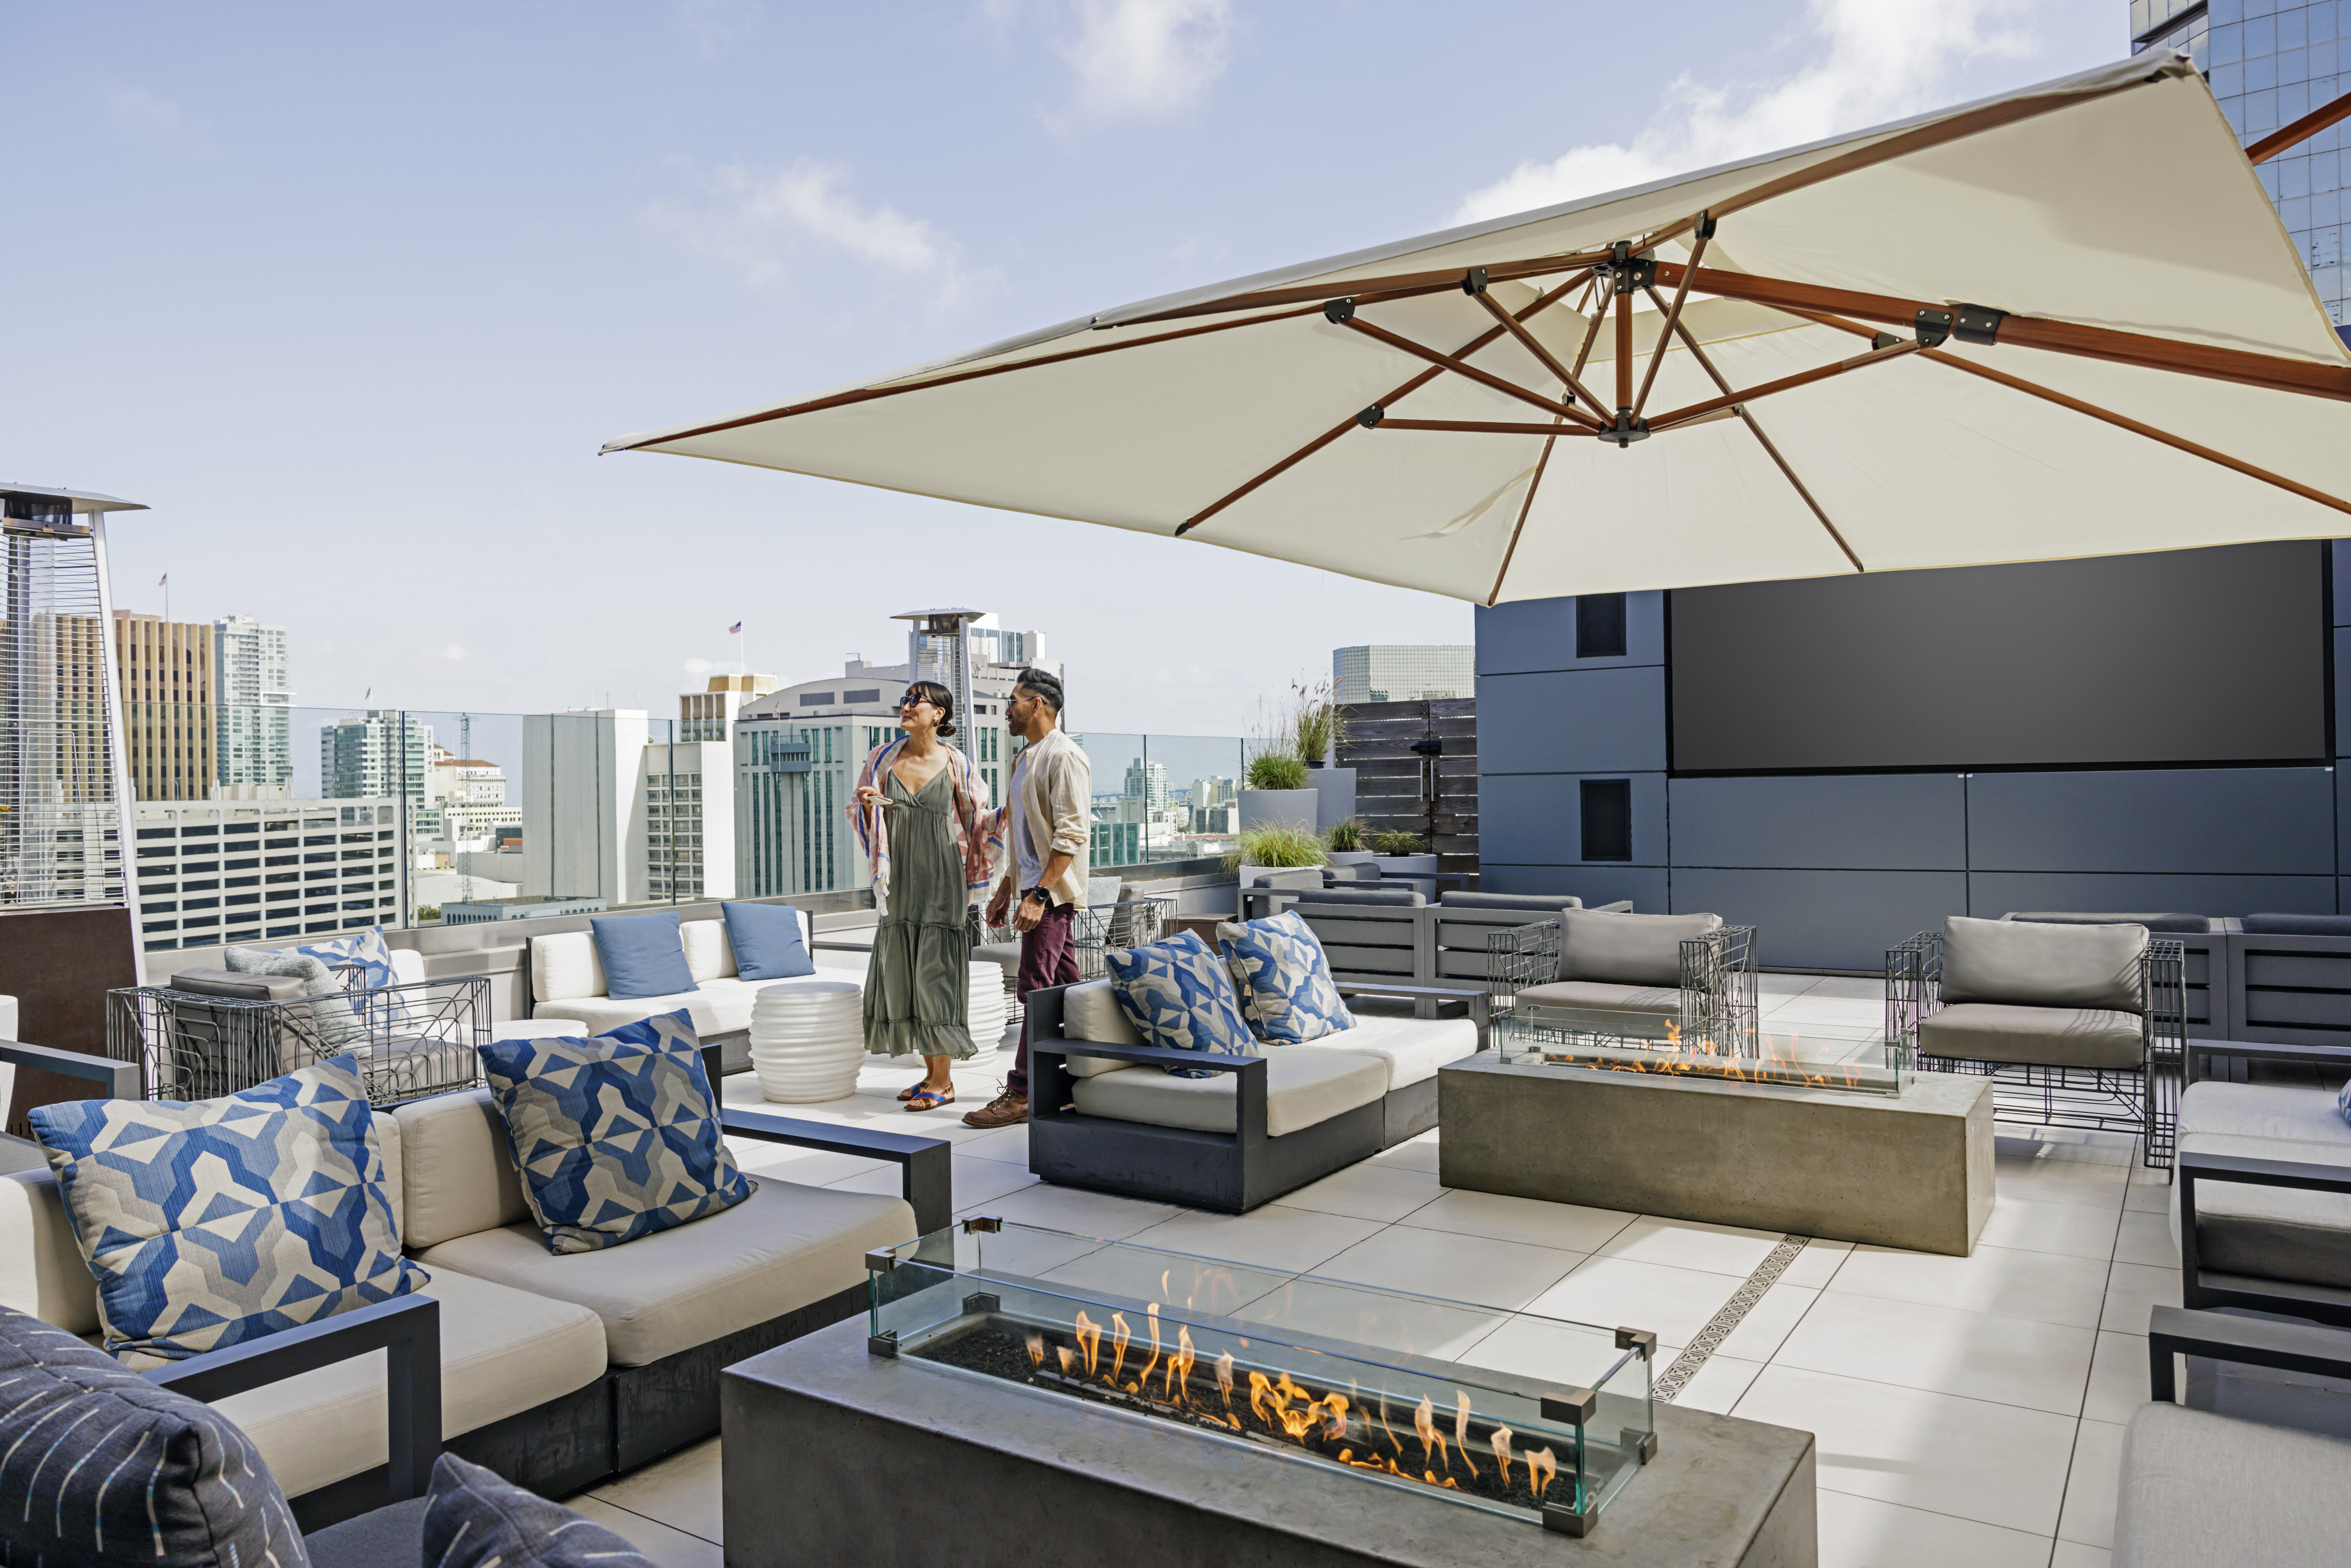 Man and woman on rooftop patio